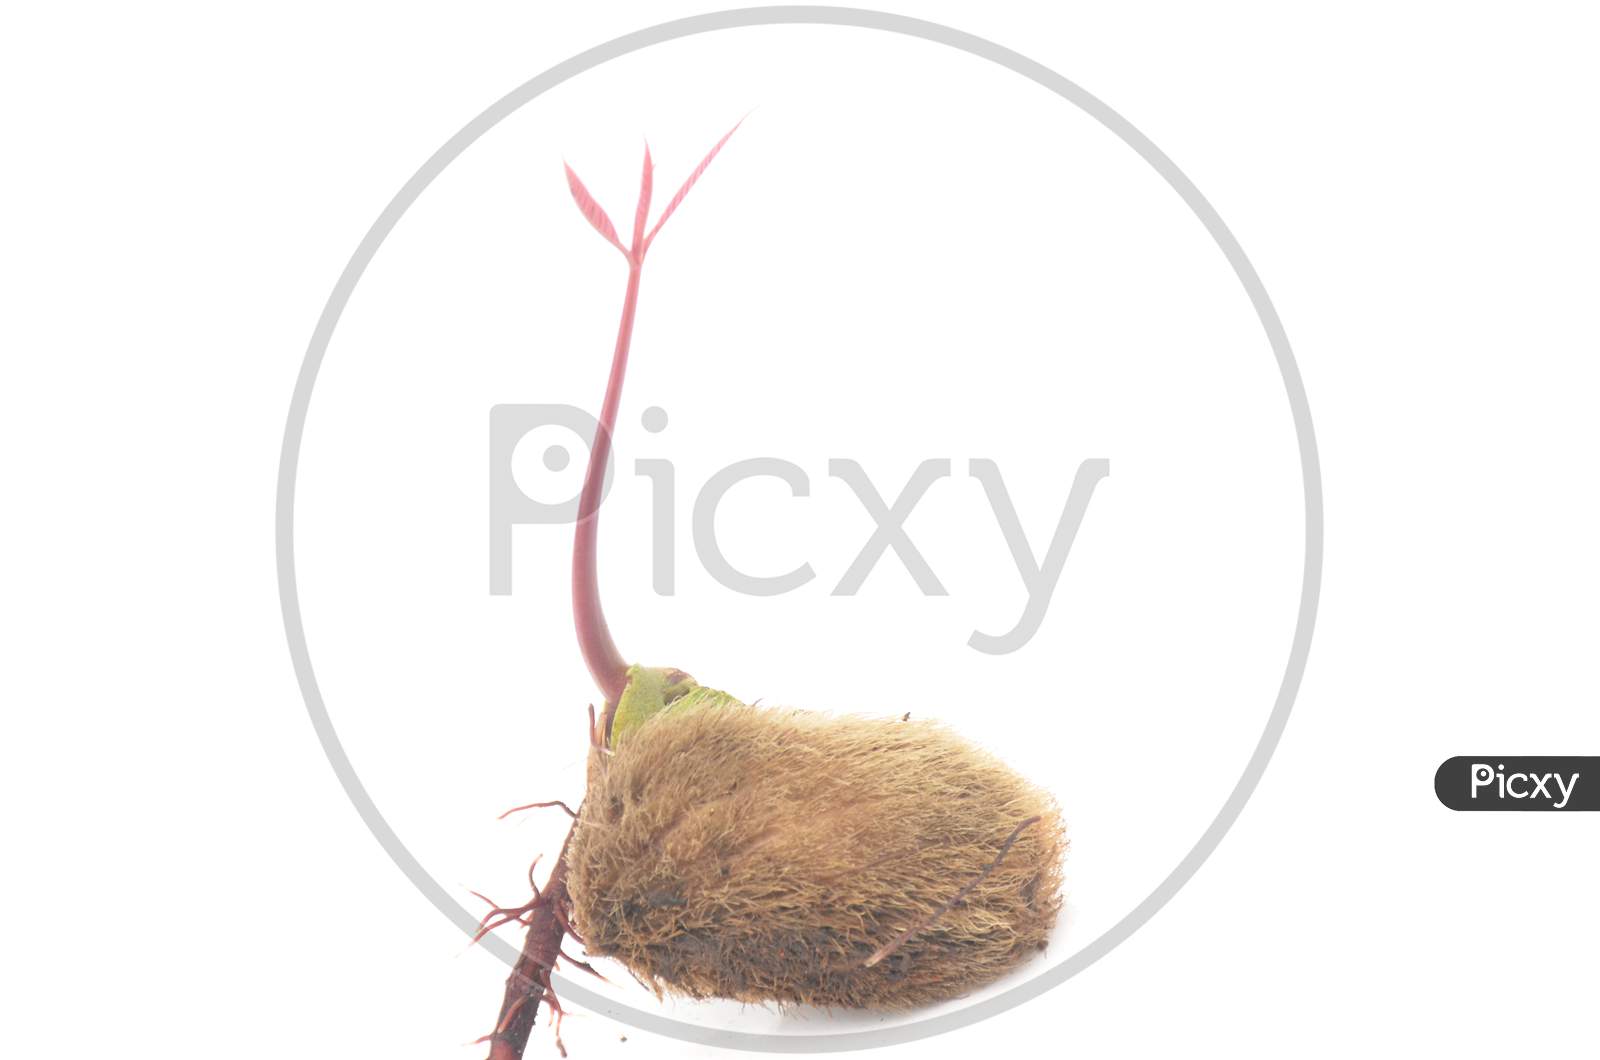 seed,growth,growing,nature,background,concept,organic,leaf,germ bud,spring,agriculture,environment,natural,small,mango,green,isolated,plant,garden,tree,young,life,germinating,fresh,white,new,botany,kernel,tree branch,dirtied,gardening,fragility,conceptual,grow,1,healthy,dirt,success,earth,ecology,be